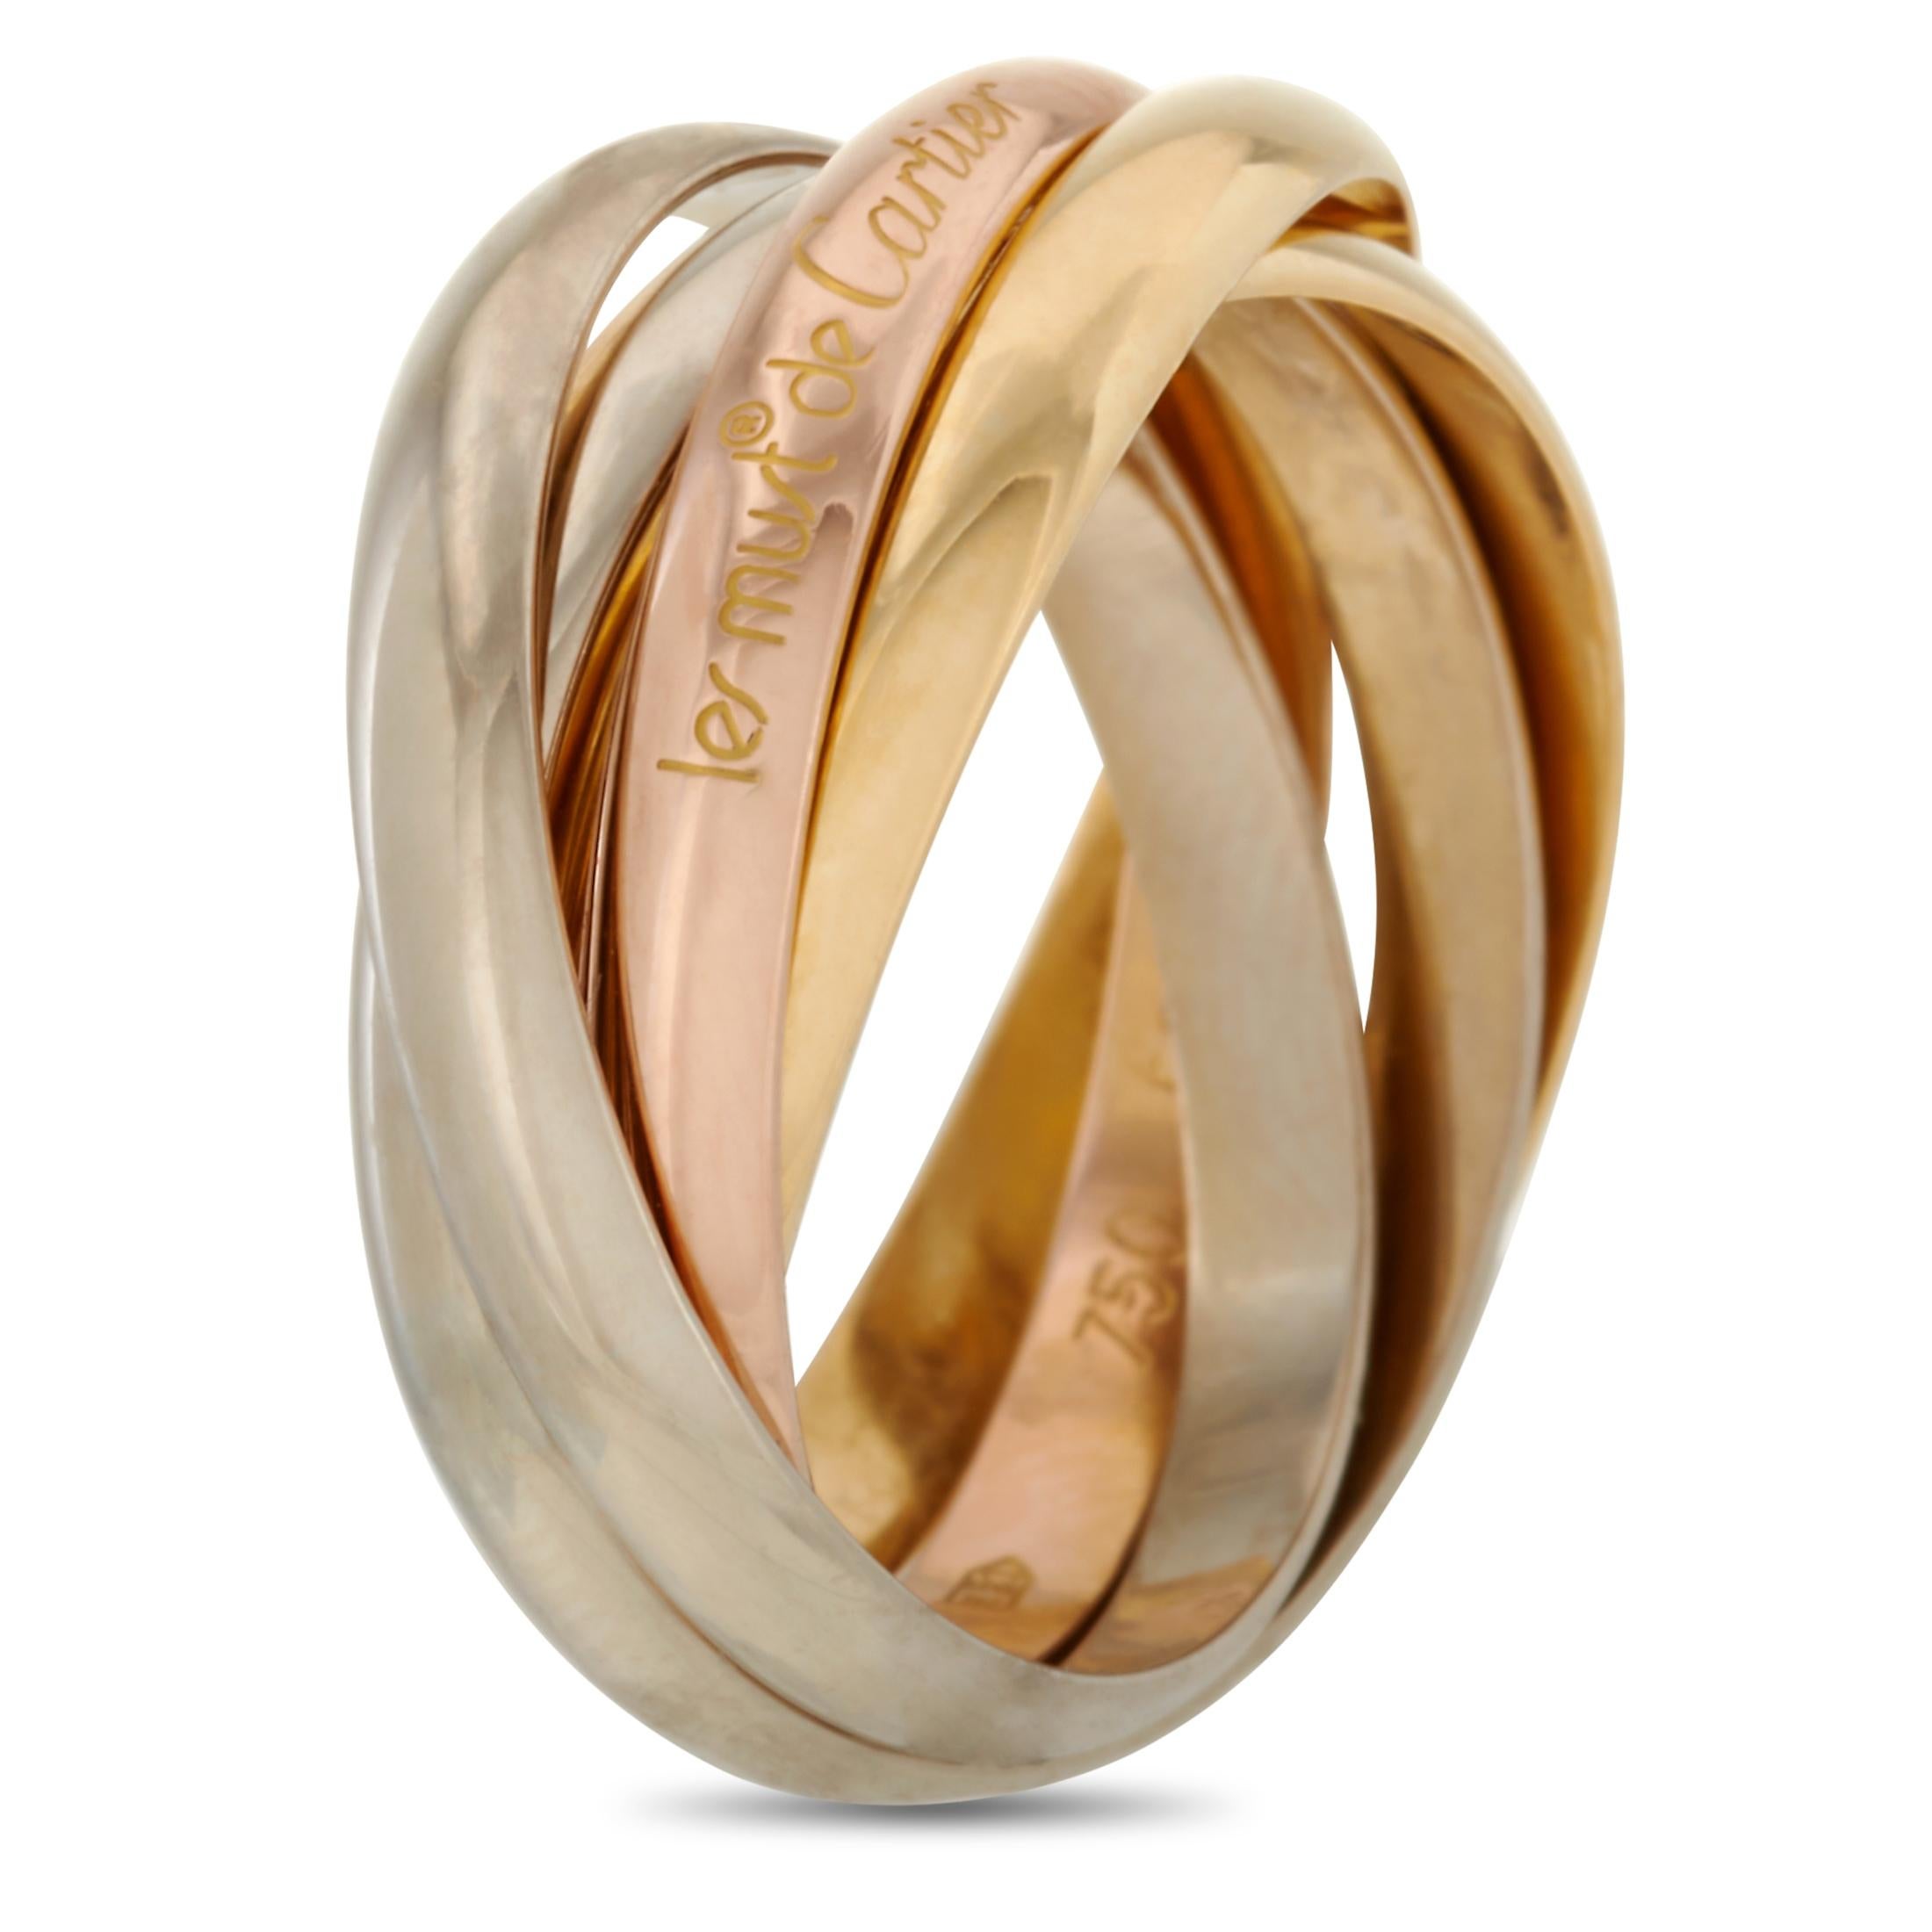 The Cartier “Trinity” ring is made out of 18K yellow, white and rose gold. It weighs 8.9 grams and boasts band thickness of 10 mm.

This item is offered in estate condition and includes the manufacturer’s box and papers.
Ring Size: 6.5